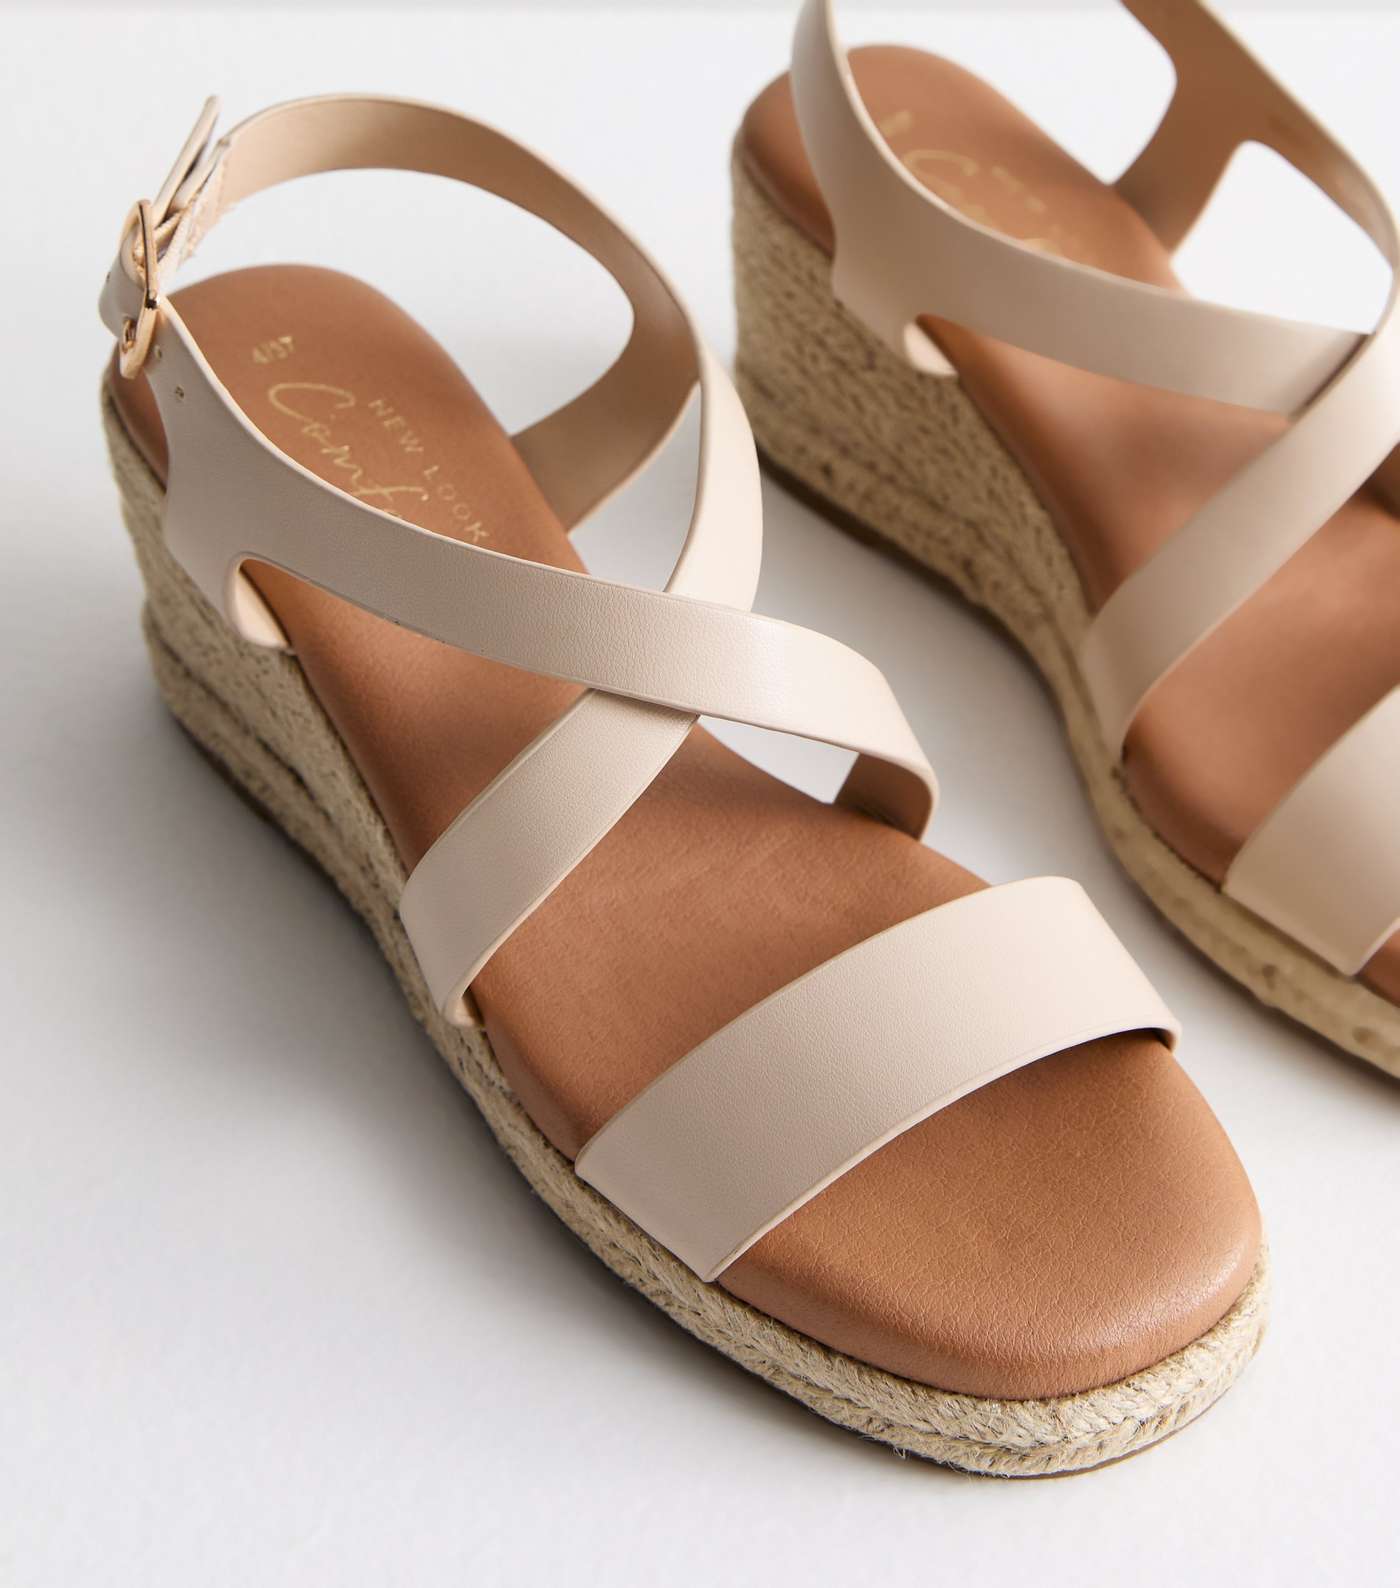 Off White Leather-Look Espadrille Wedge Heel Sandals Image 3